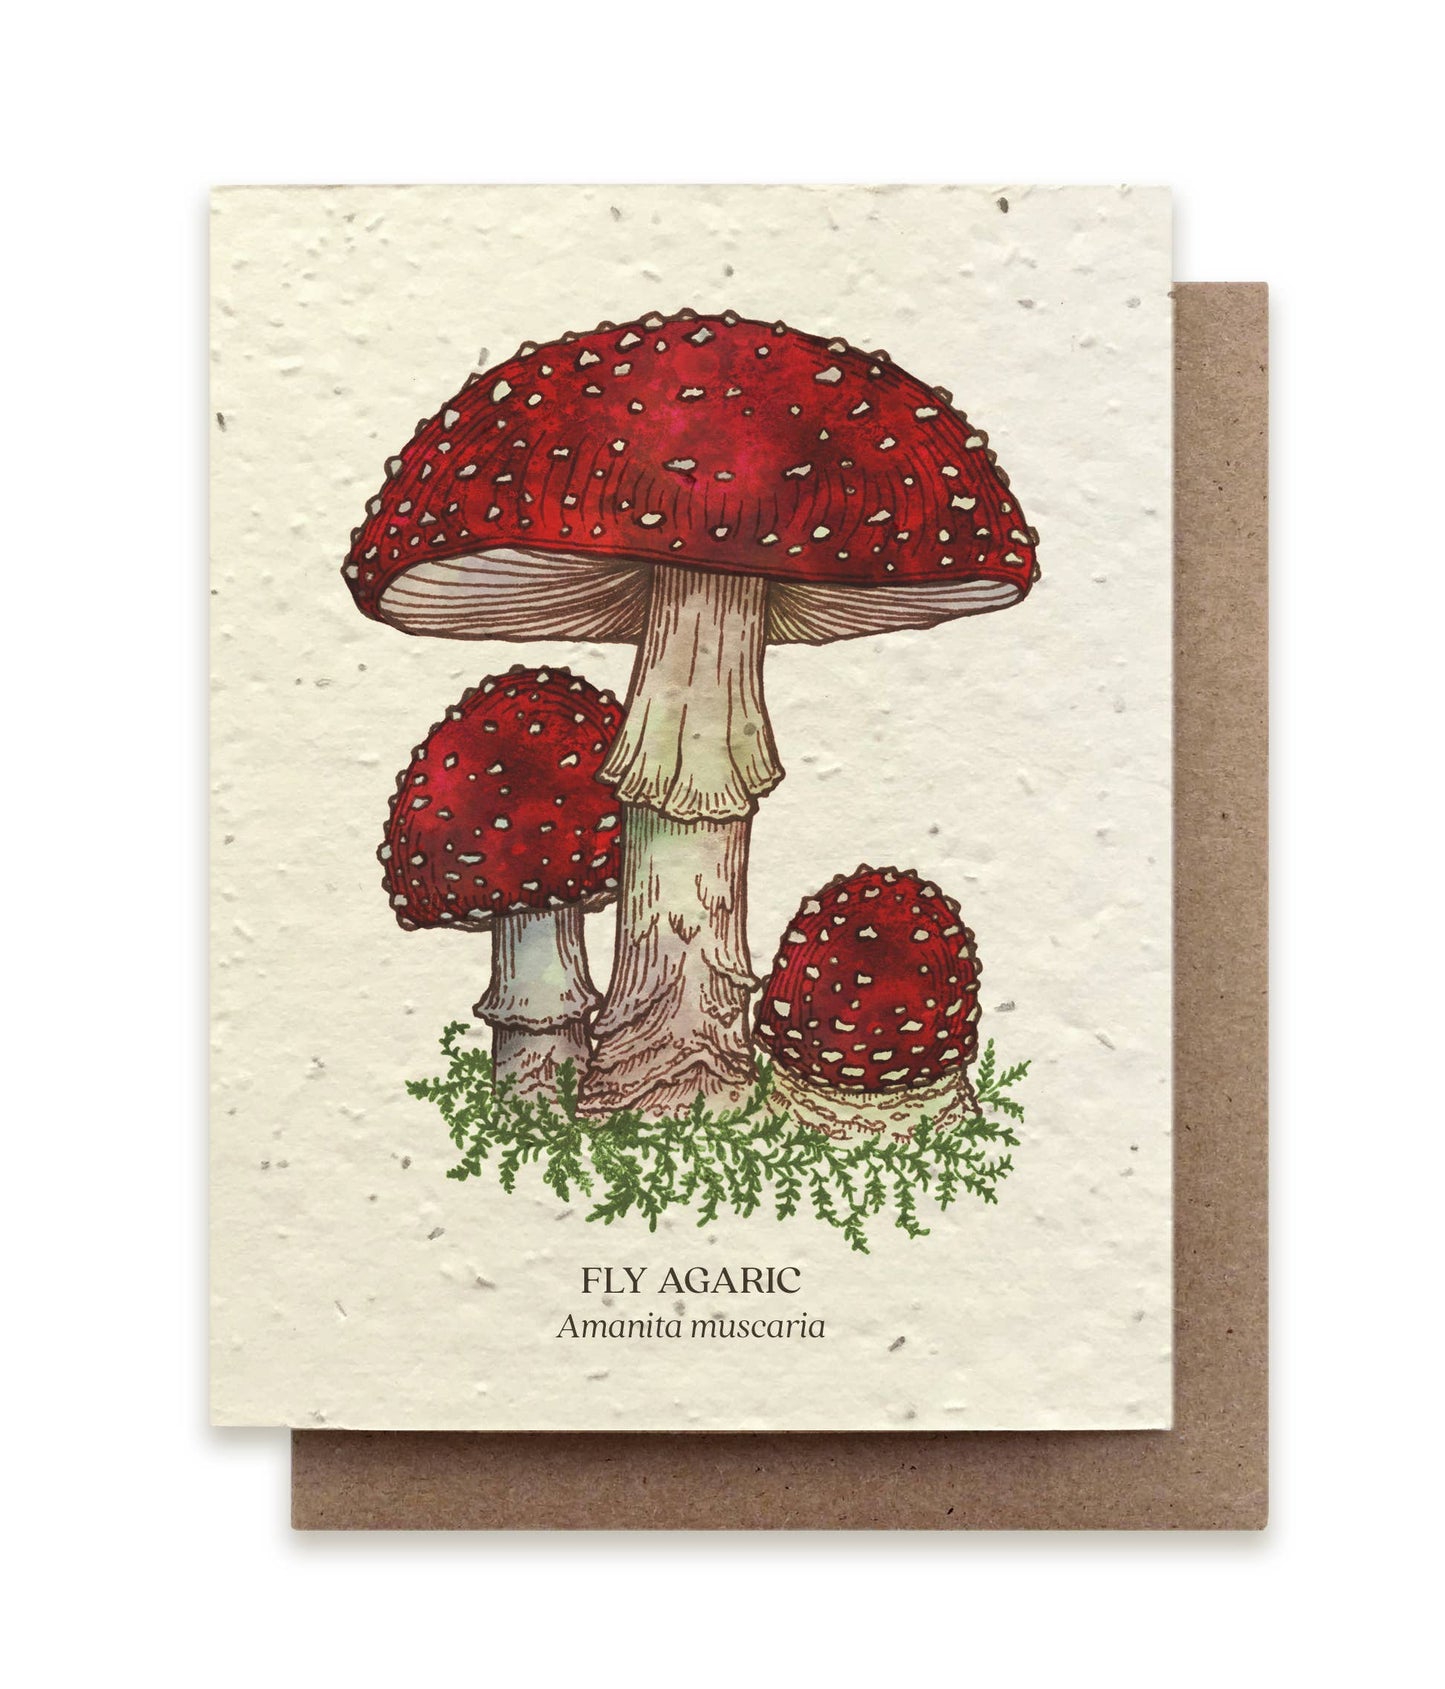 Fly Agaric Mushroom Greeting Cards - Plantable Seed Paper